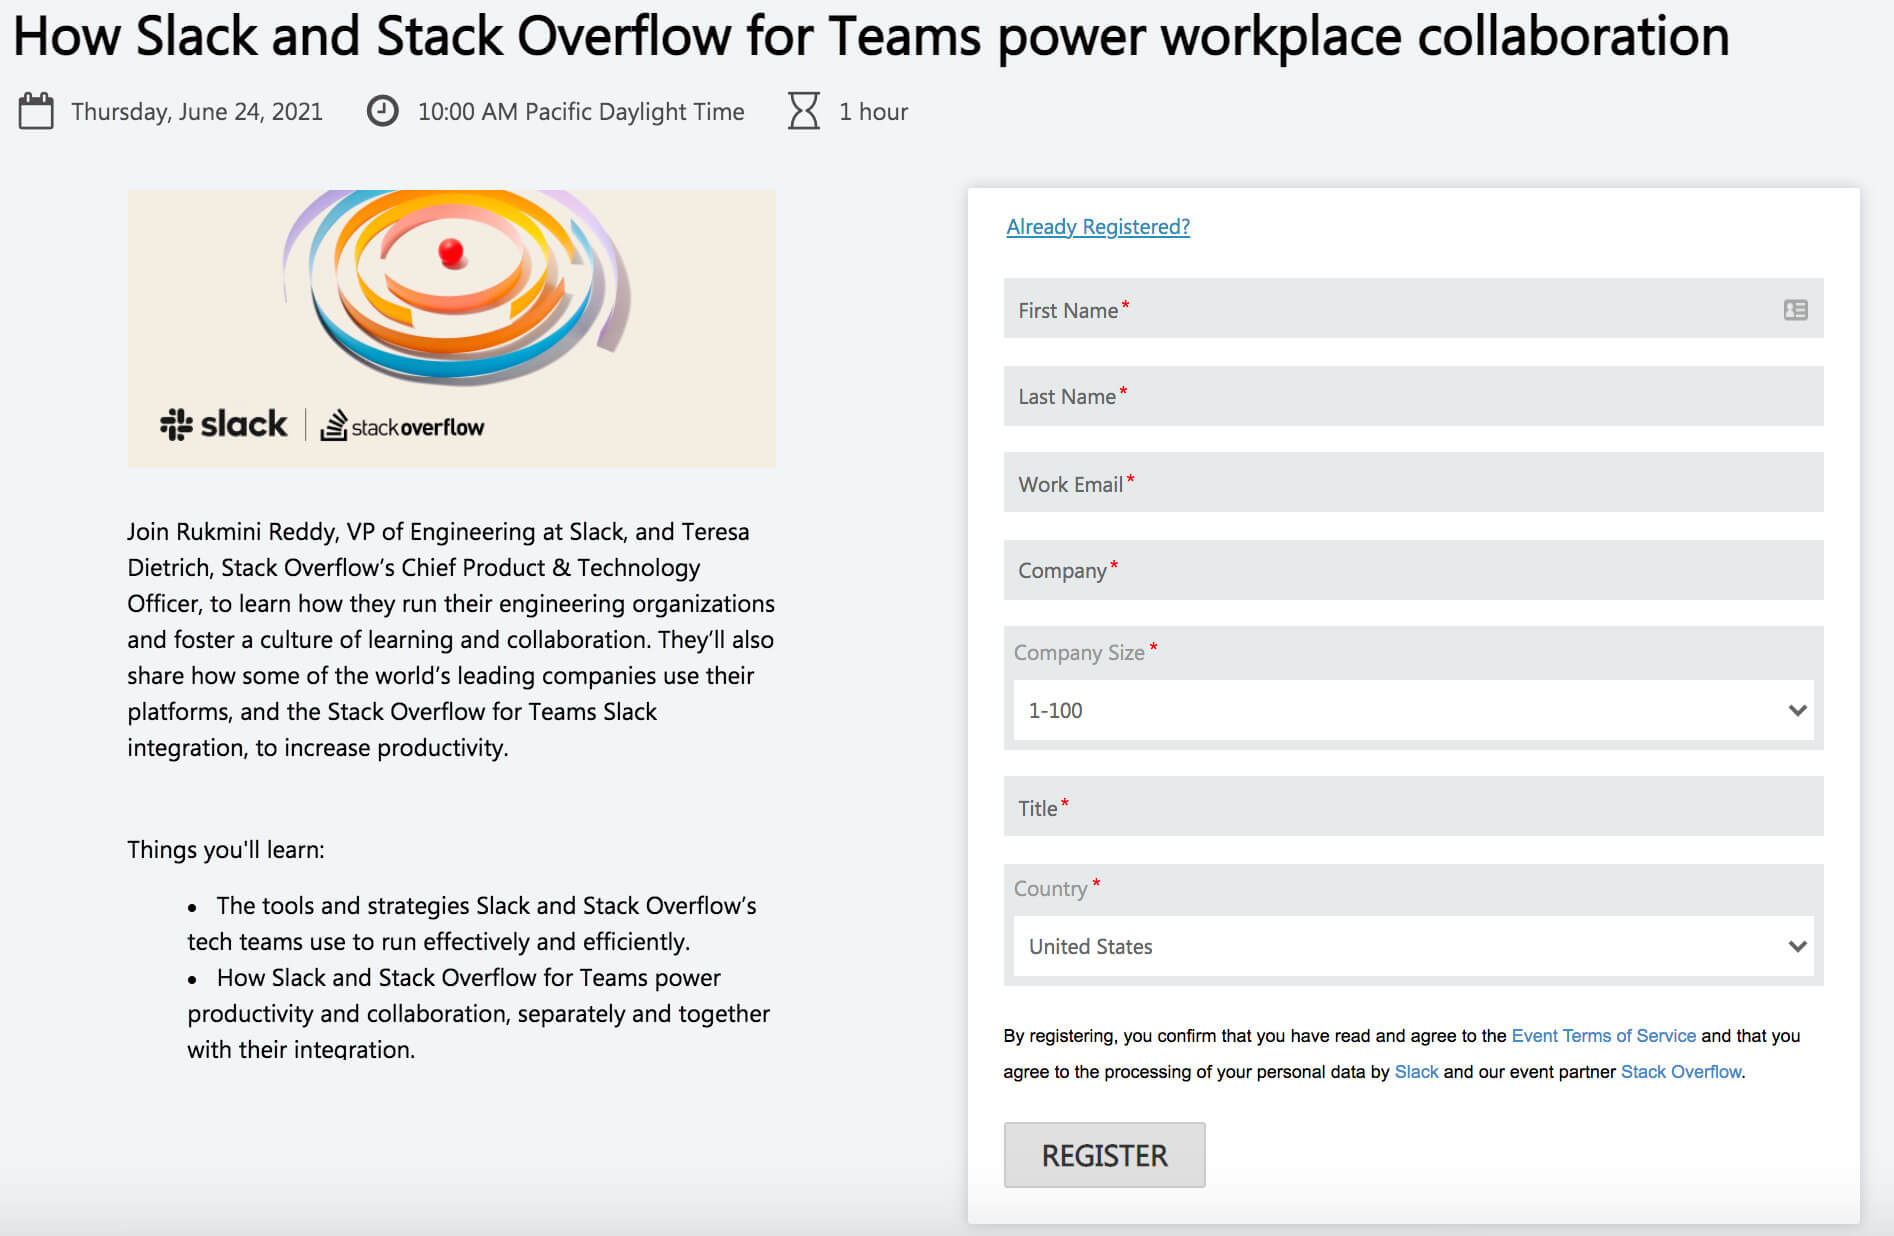 LinkedIn landing page example from Slack and Stack Overflow